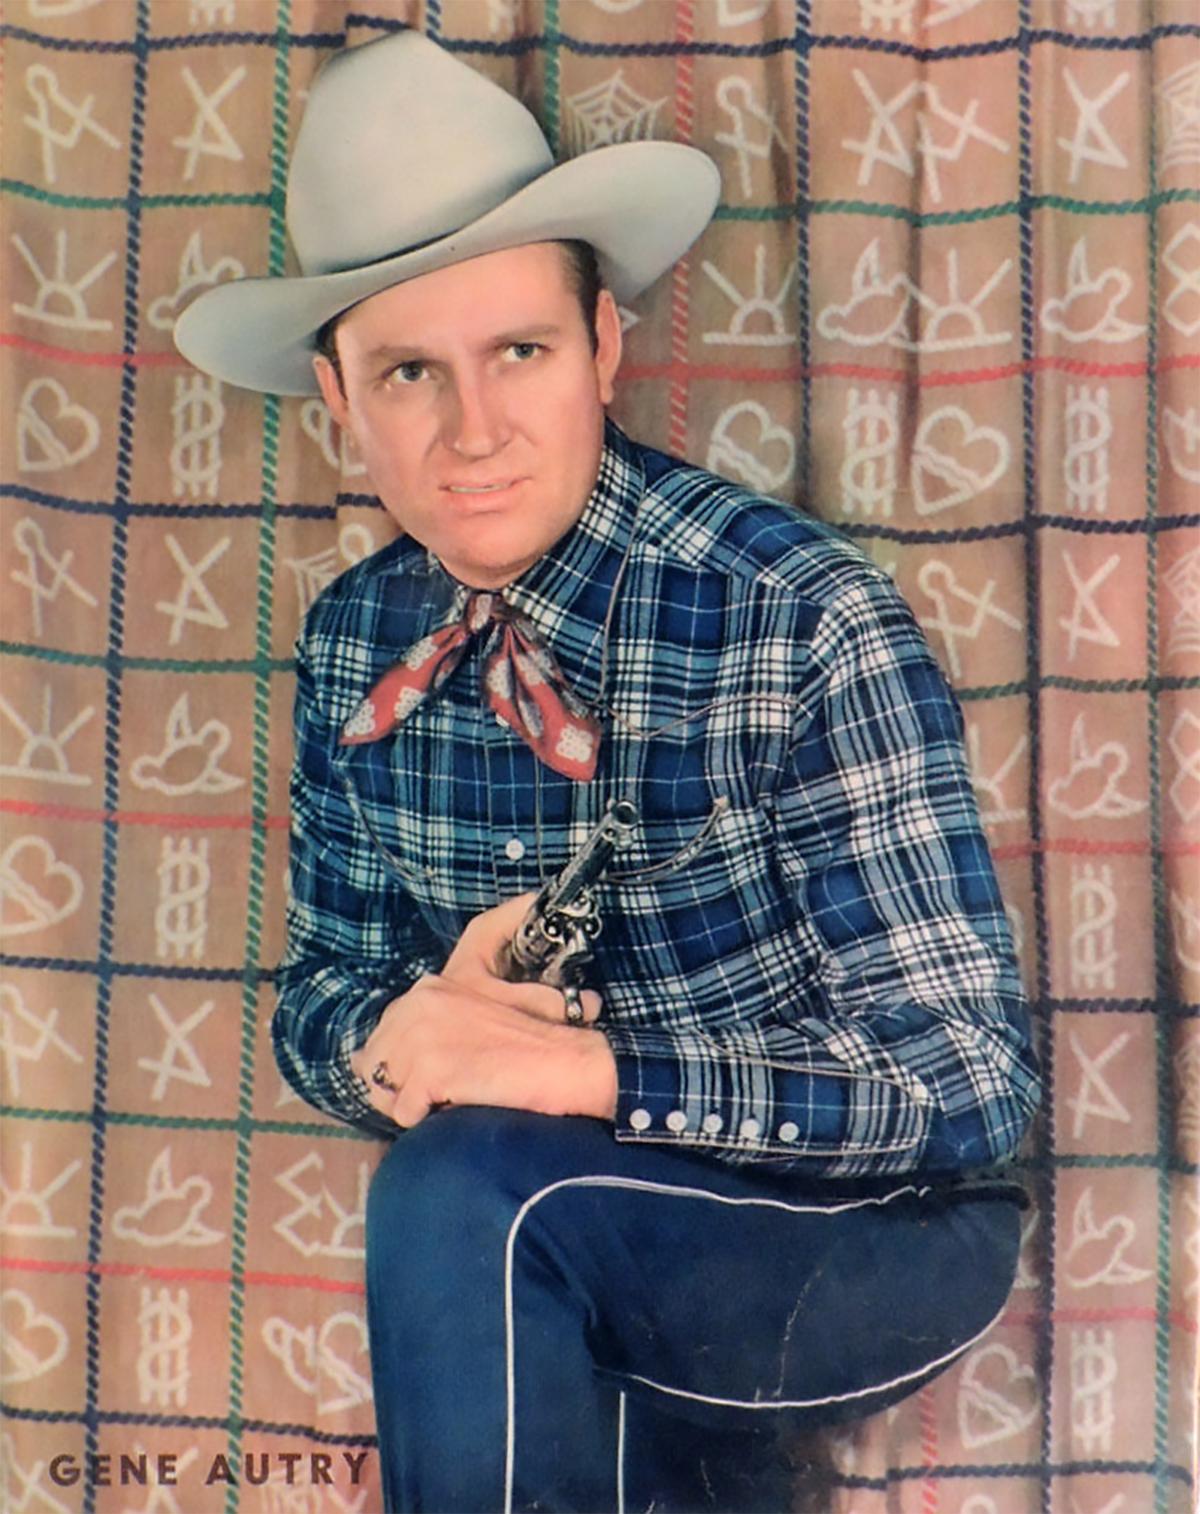 Gene Autry on the cover of a 1942 New York Sunday News magazine. (Public Domain)